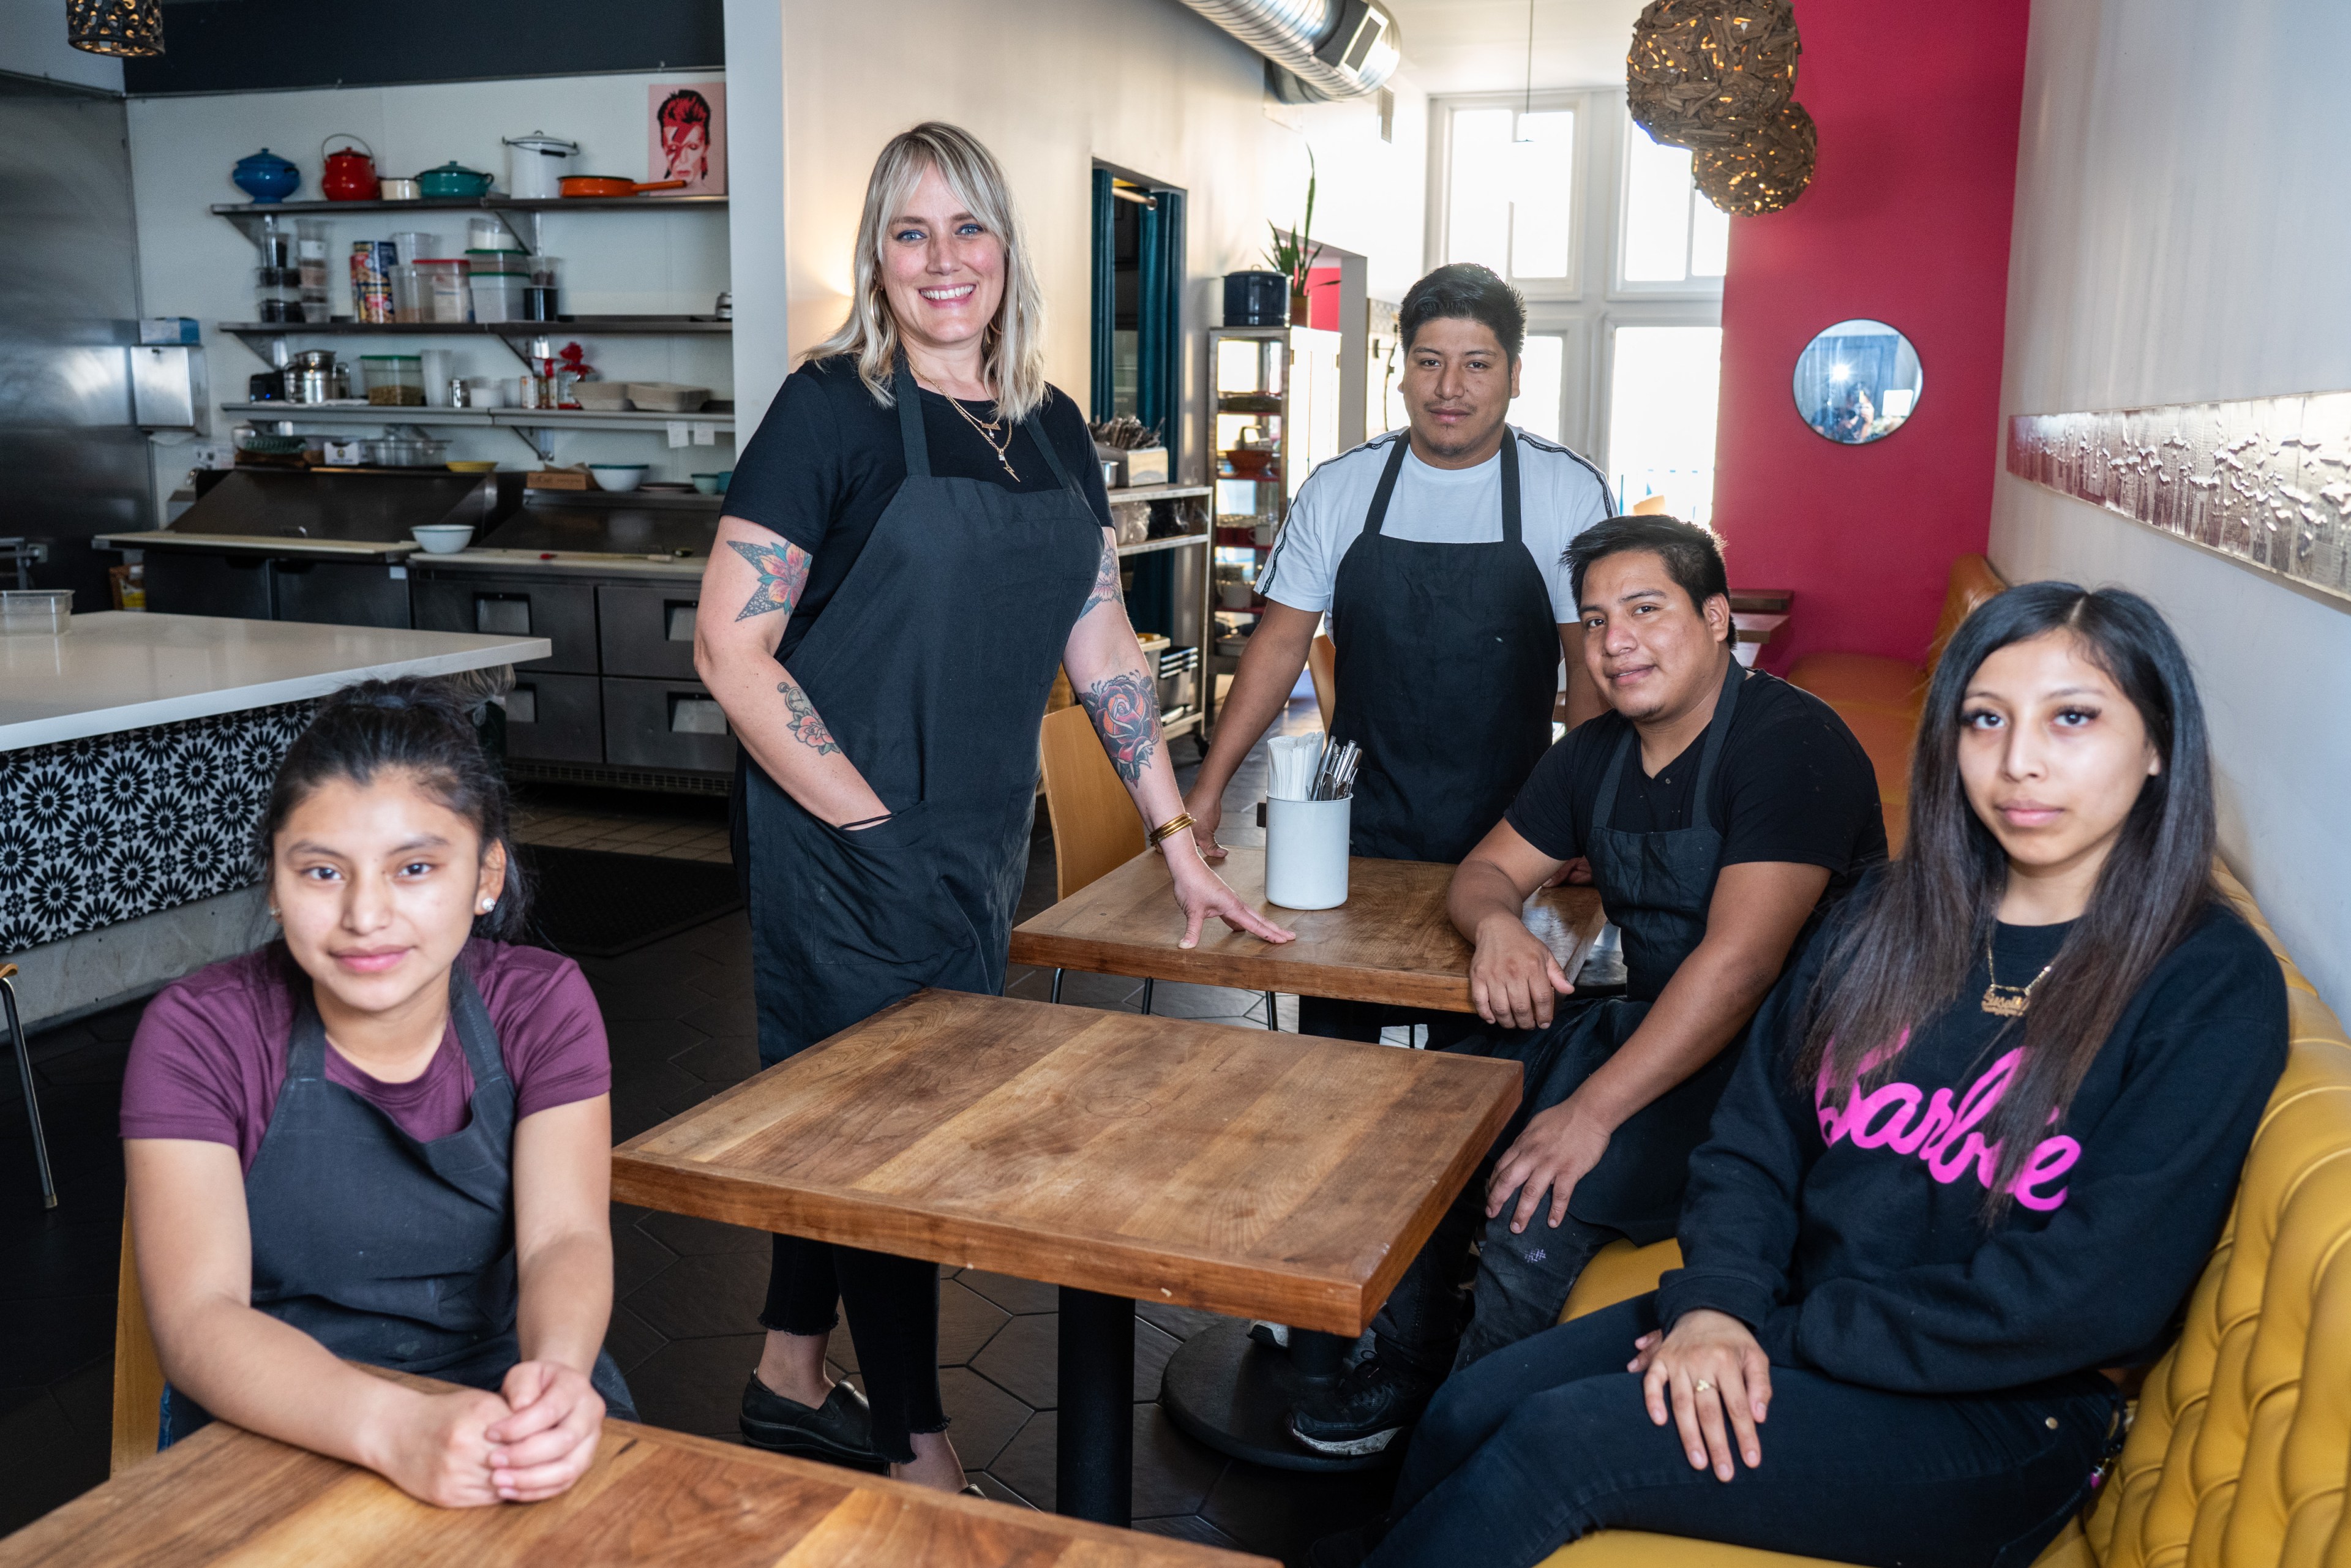 A diverse restaurant team poses inside a cozy eatery with a kitchen in the background.